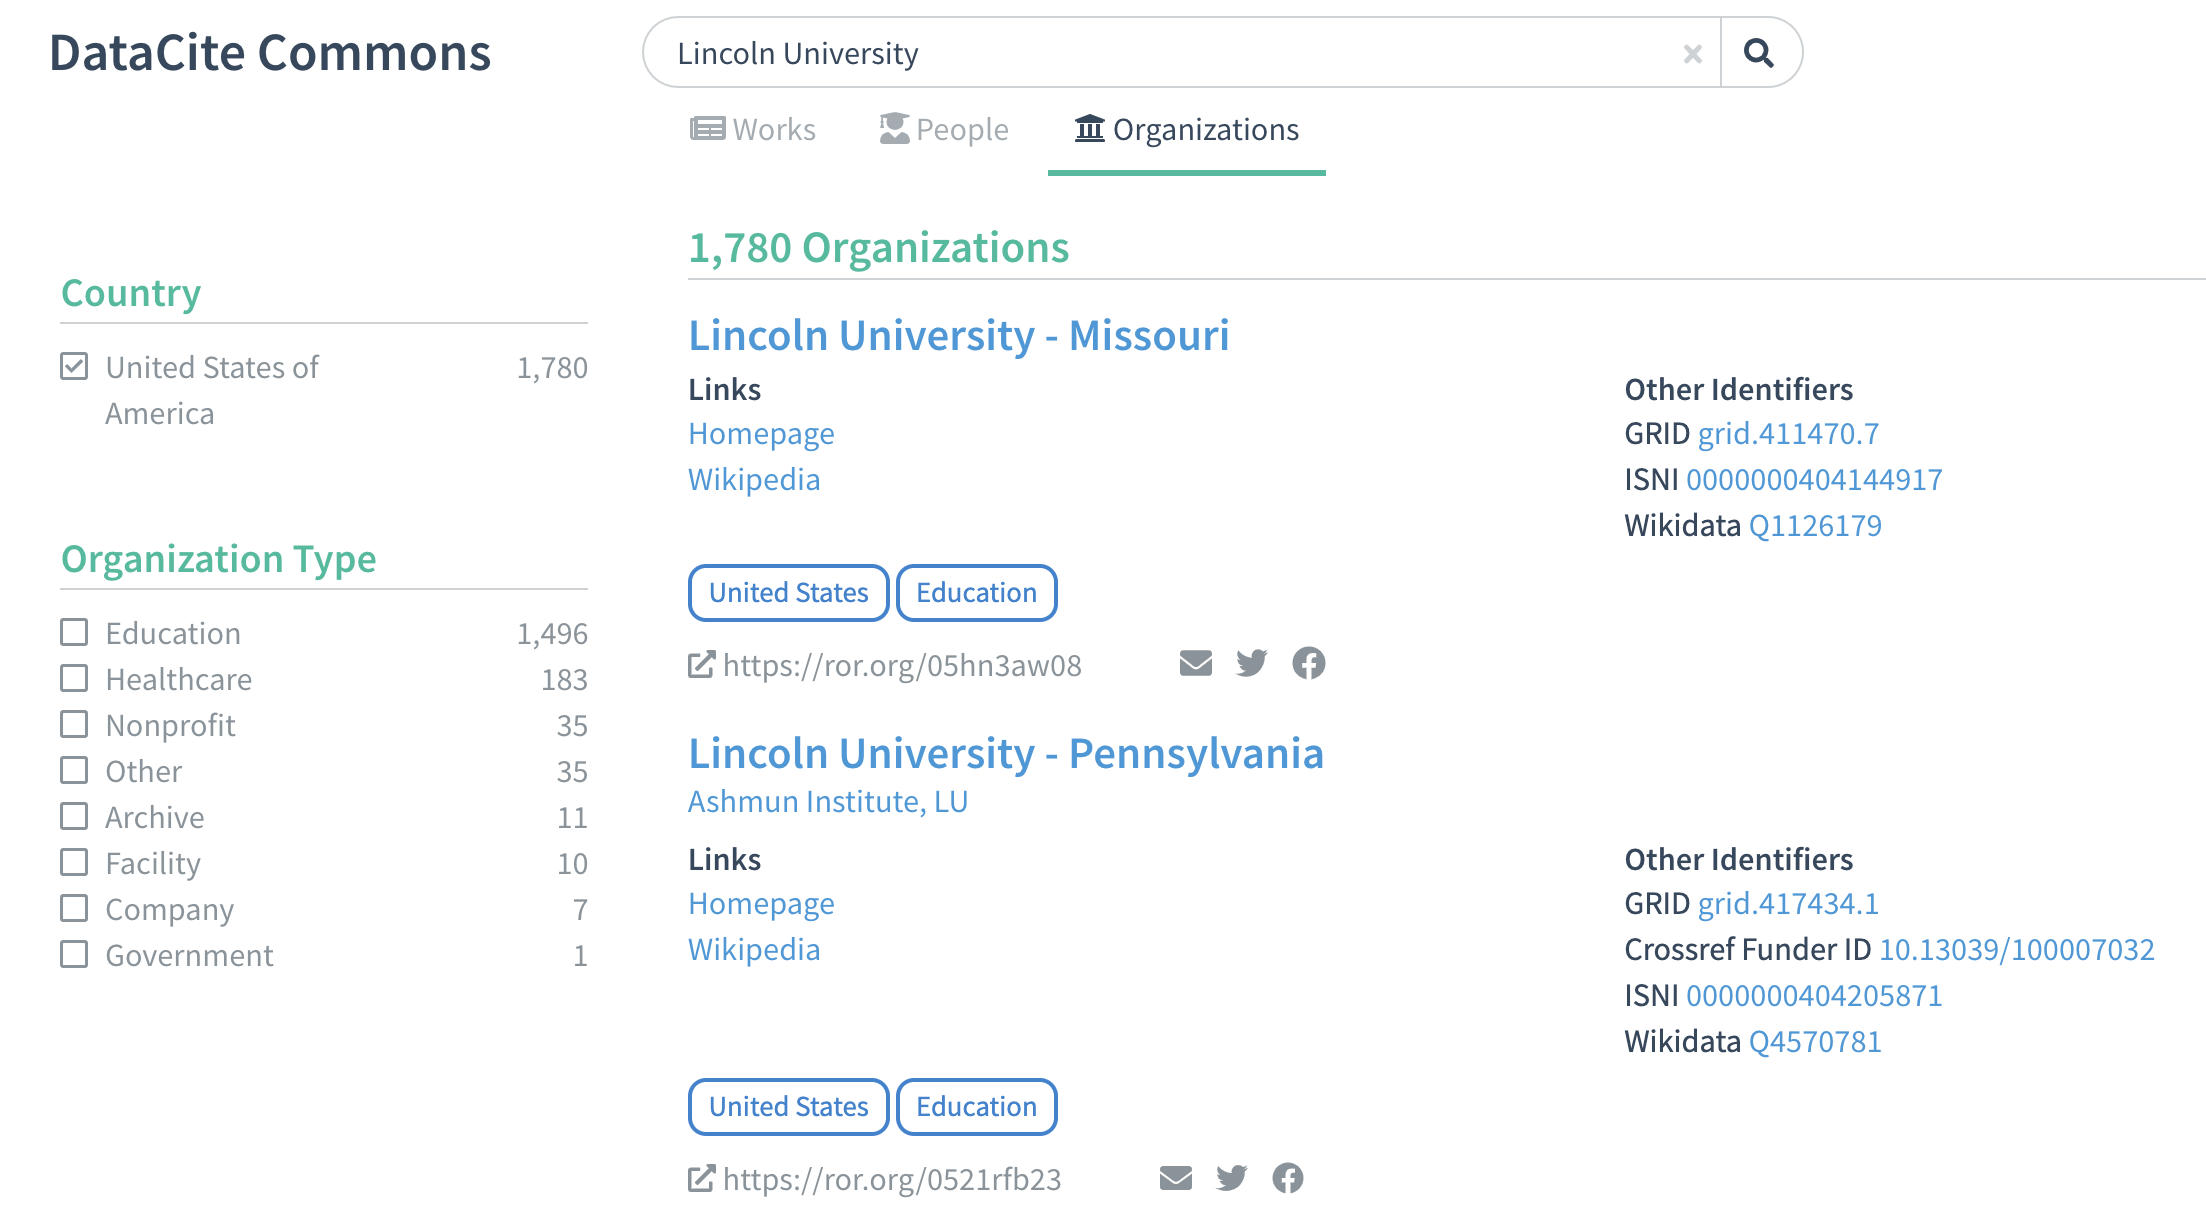 Organization keyword search with filtering by country. https://commons.datacite.org/ror.org?query=Lincoln+University&country=us